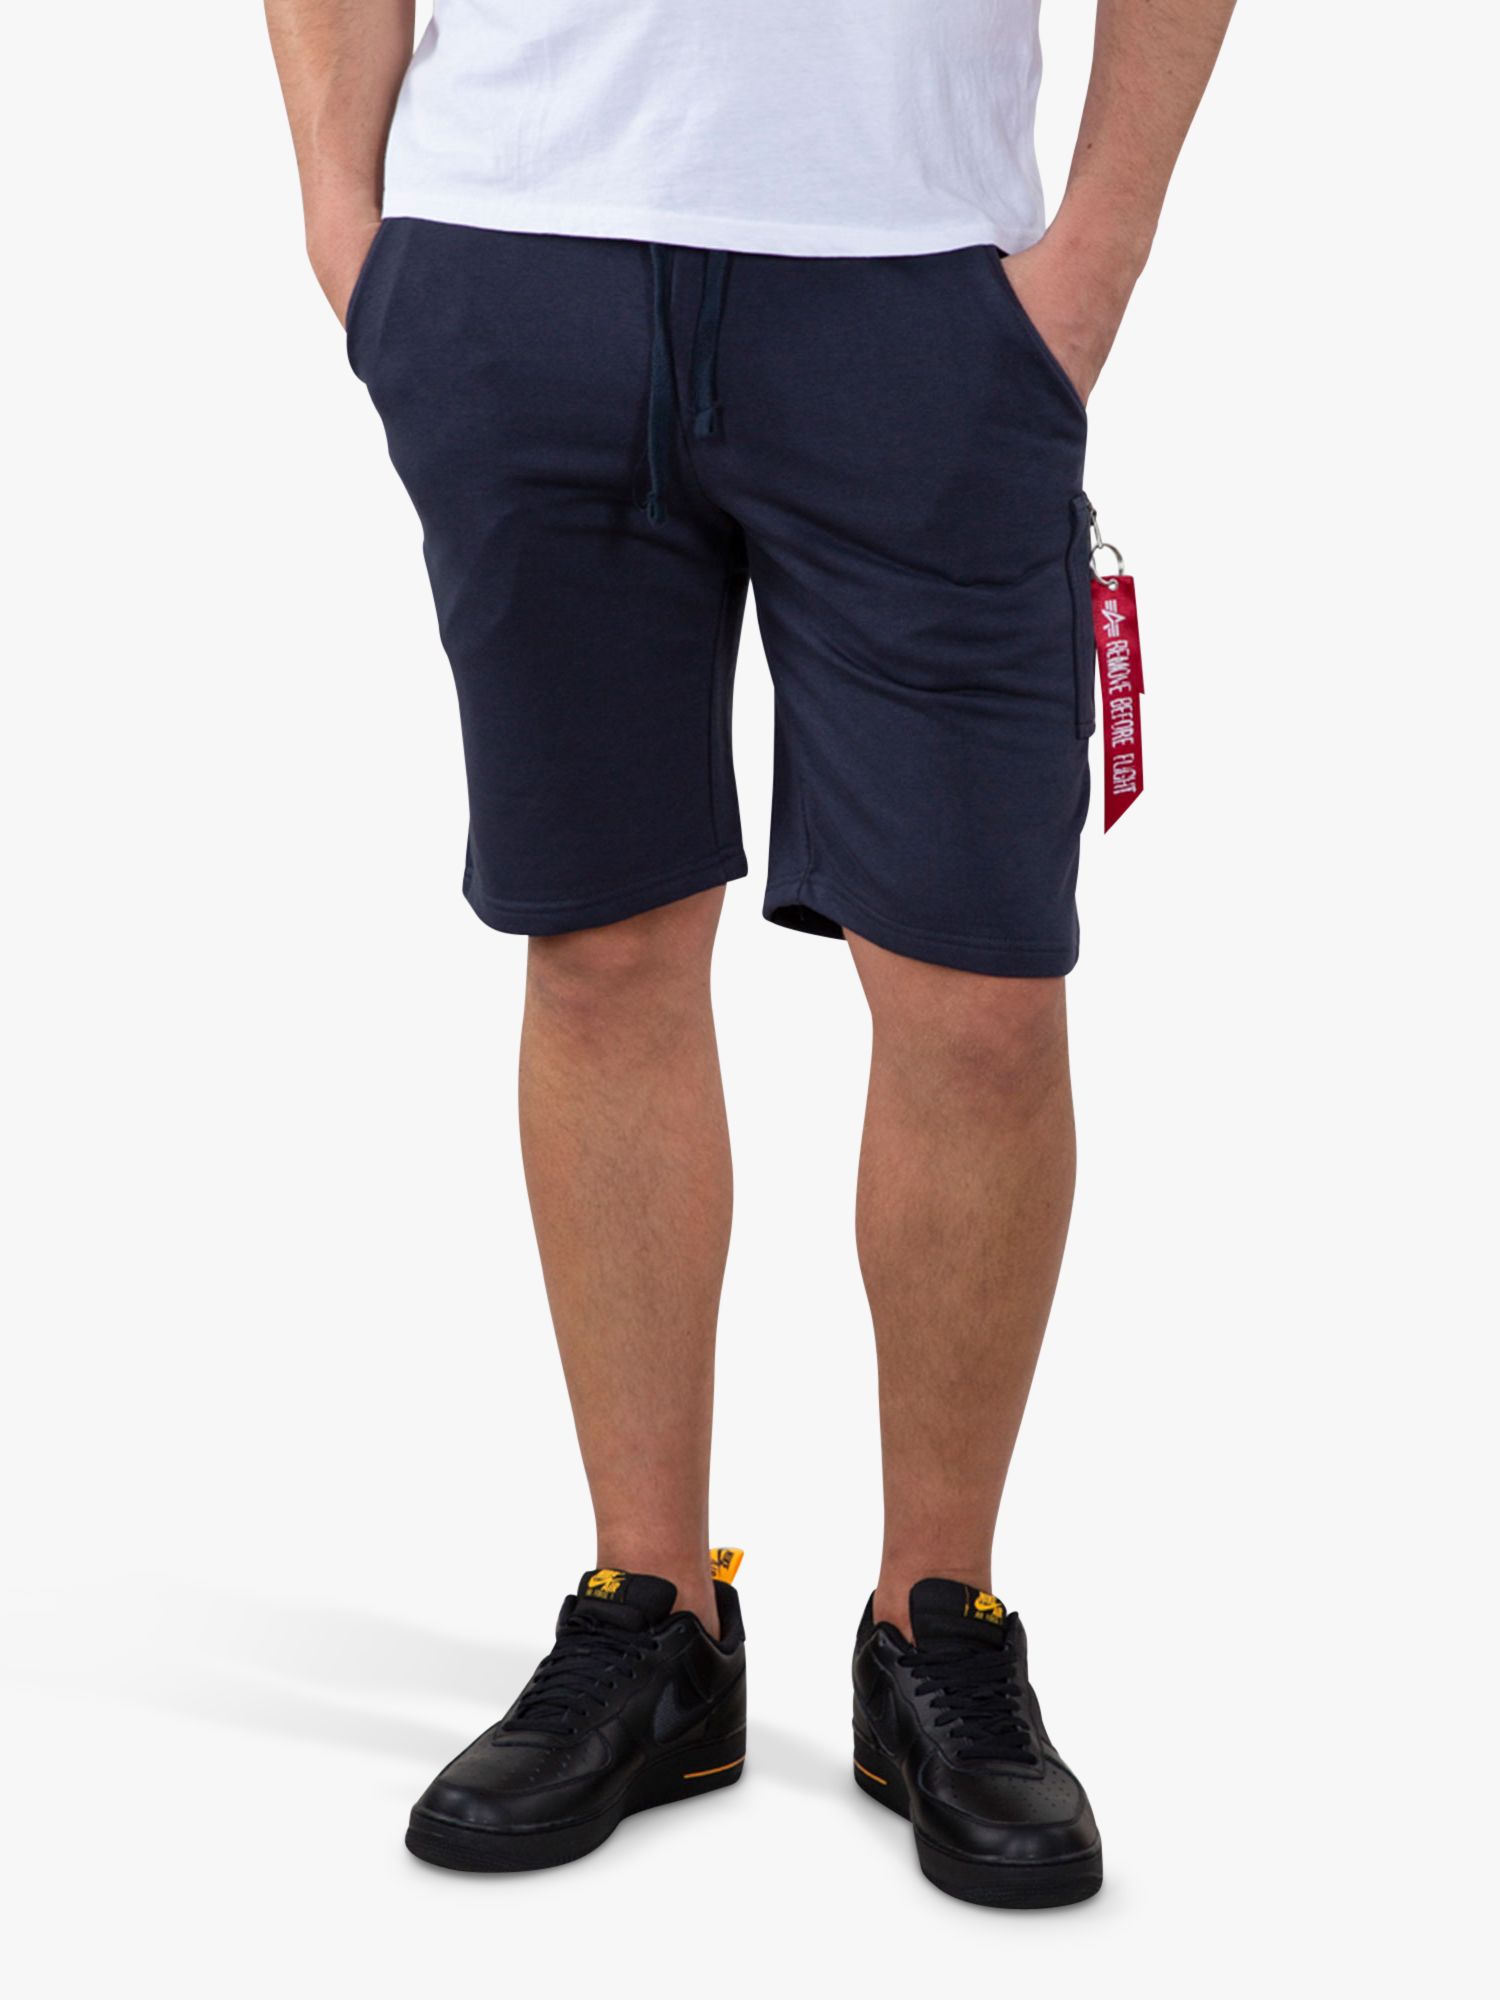 Alpha Industries X-Fit at Partners & John 07 Blue Sweat Shorts, Cargo Rep Lewis